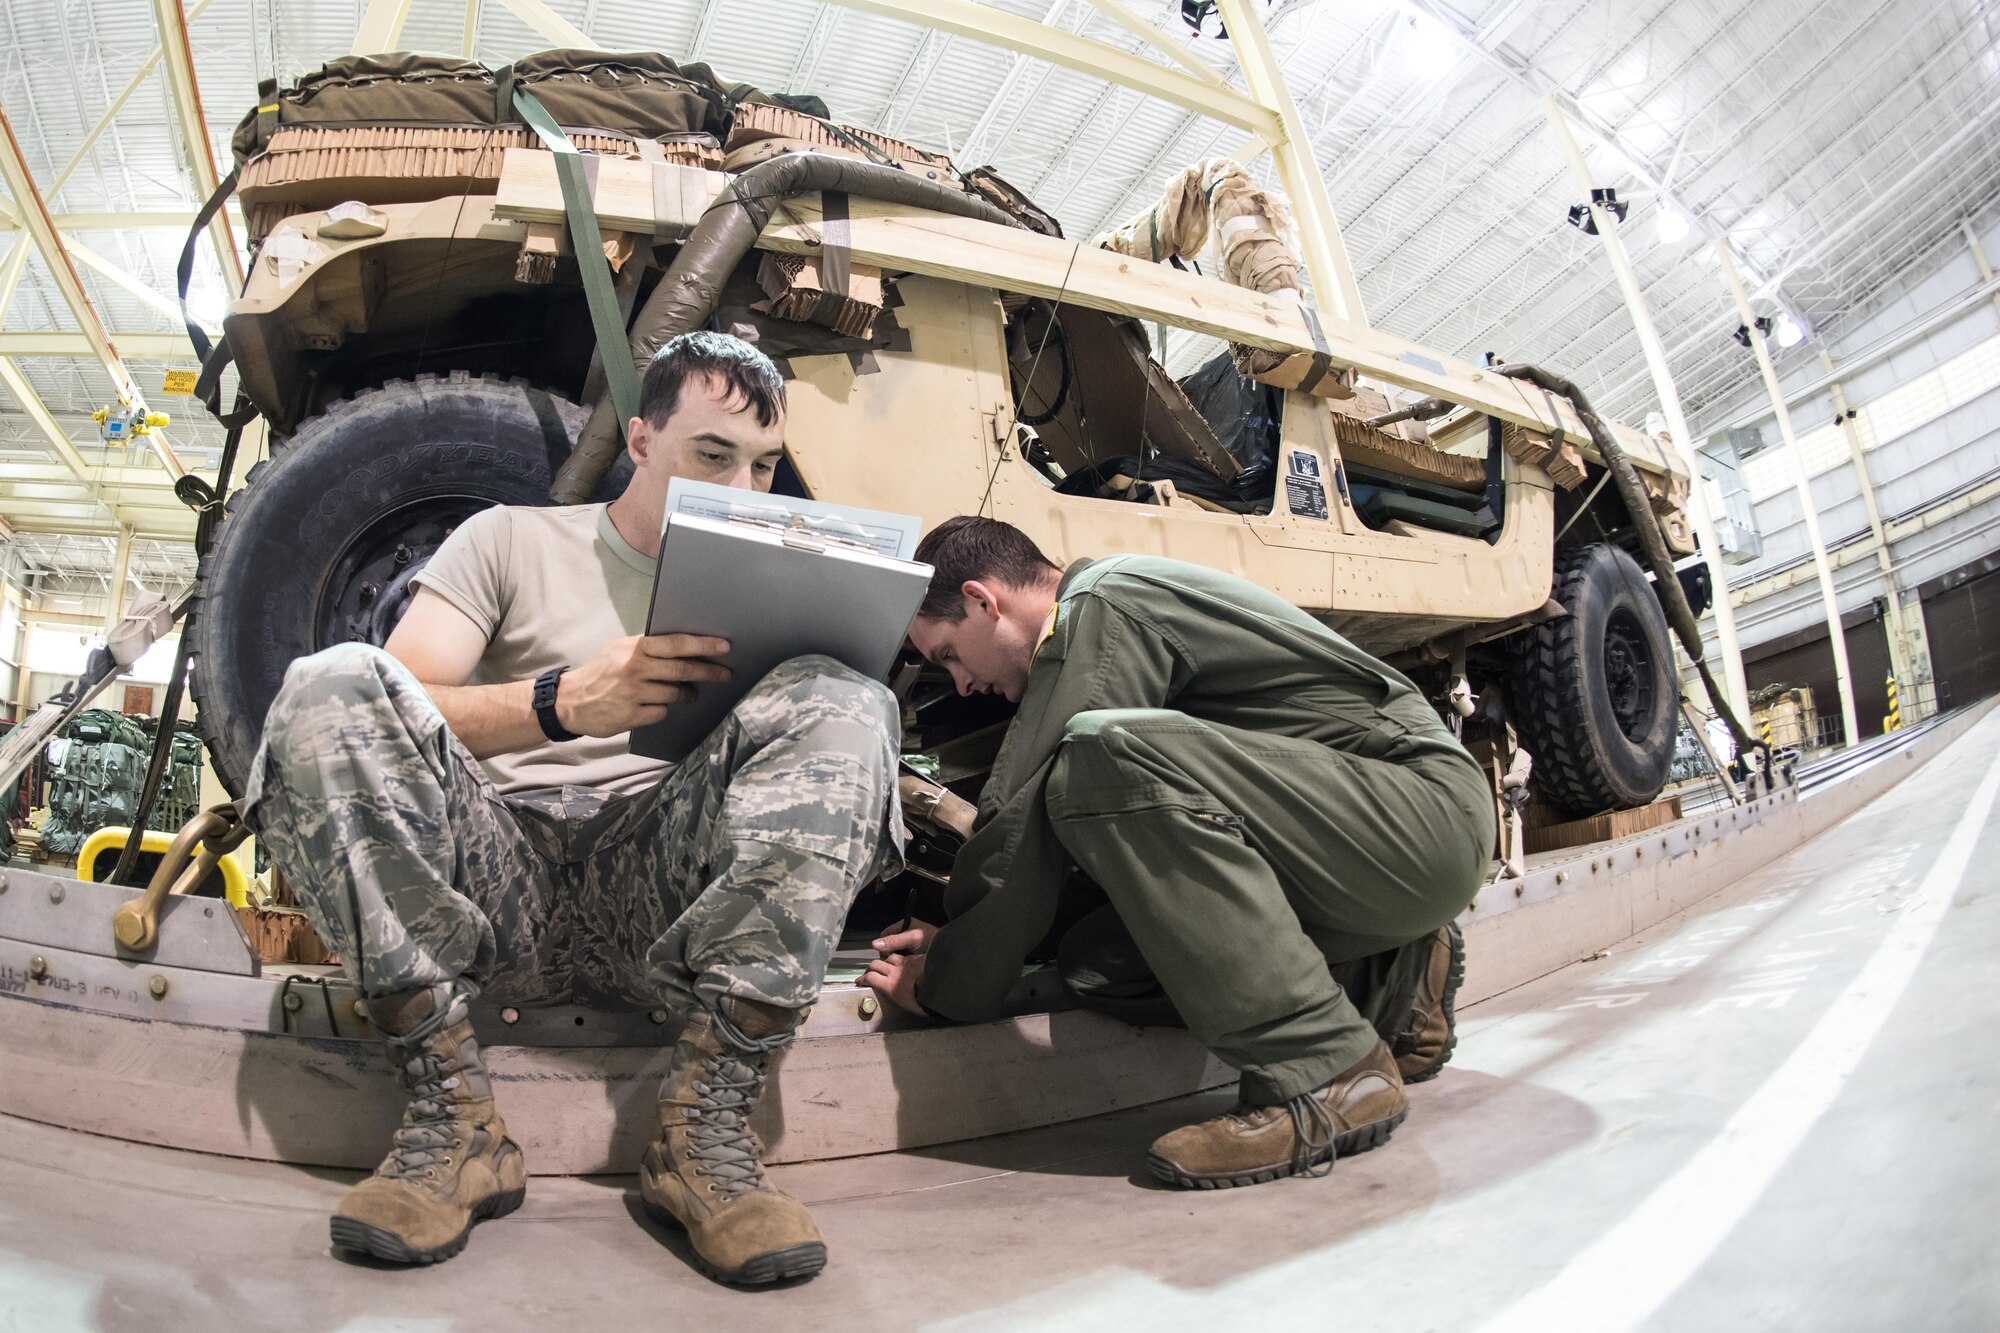 Staff Sgt. Matthew Van Compernolle and Senior Airman Wesley Zech, joint airdrop inspectors in the 43d Operations Support Squadron at Pope Army Airfield, complete paperwork to clear heavy equipment for airdrop after an inspection at the Army's Heavy Drop Rigging Facility here April 26. Van Compernolle and Zech worked with fellow 43d OSS inspectors to ensure more than 200 tons of cargo were ready for airdrop during Large Package Week and Exercise Jade Helm. (U.S. Air Force photo/Marc Barnes)